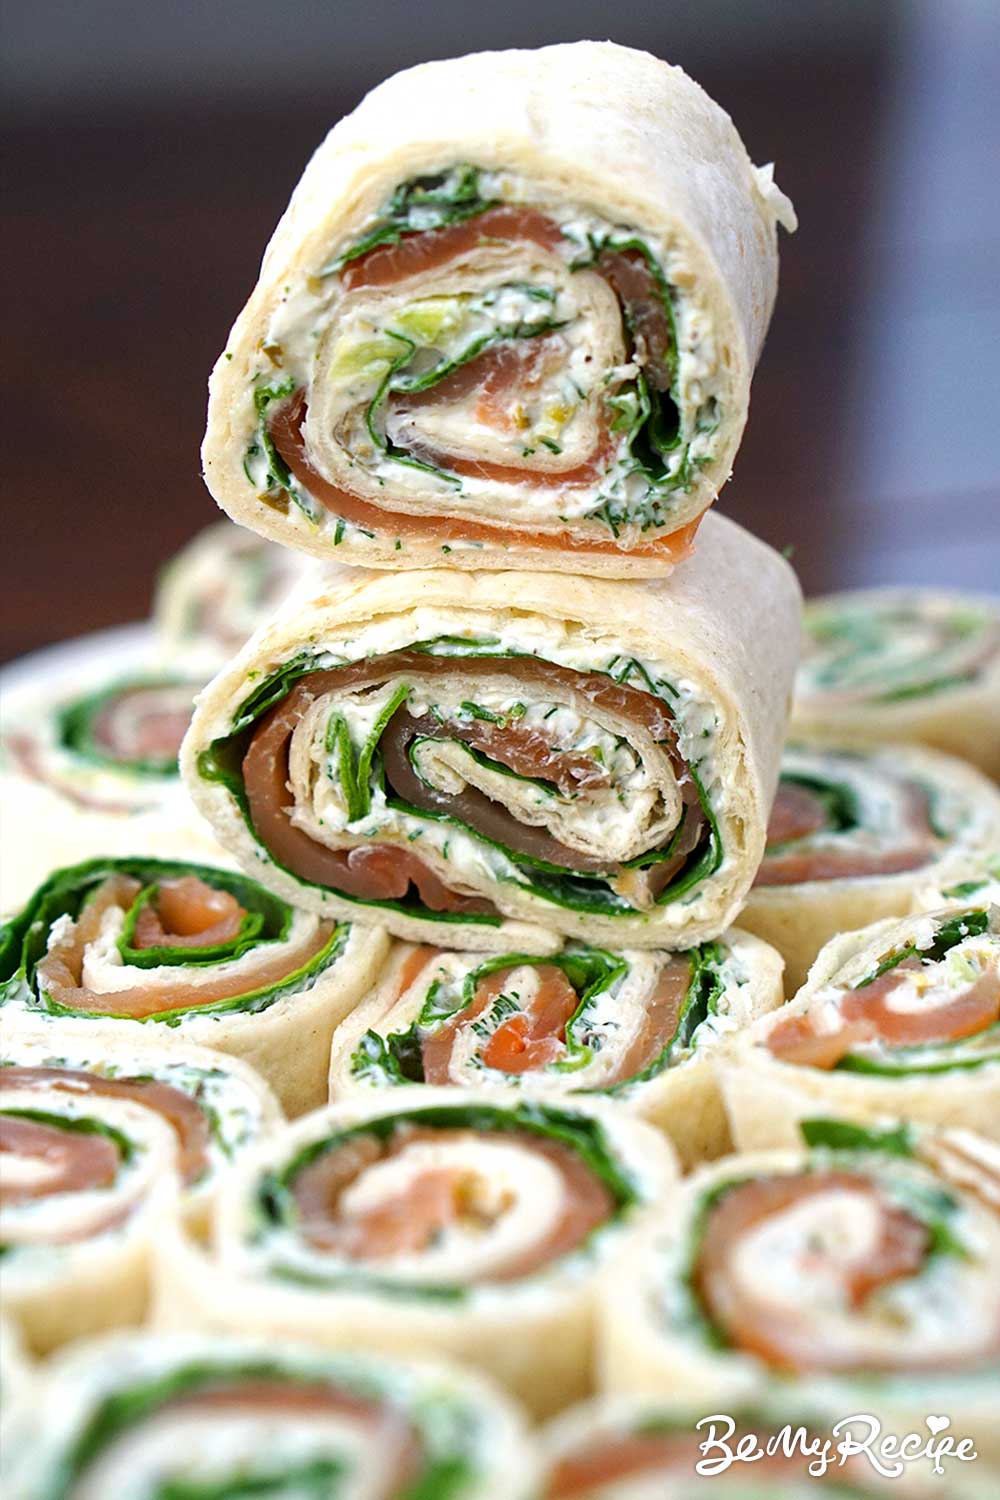 Smoked Salmon Tortilla Roll-Ups (with Herb Cream Cheese, Lemon, Capers, and Spinach)